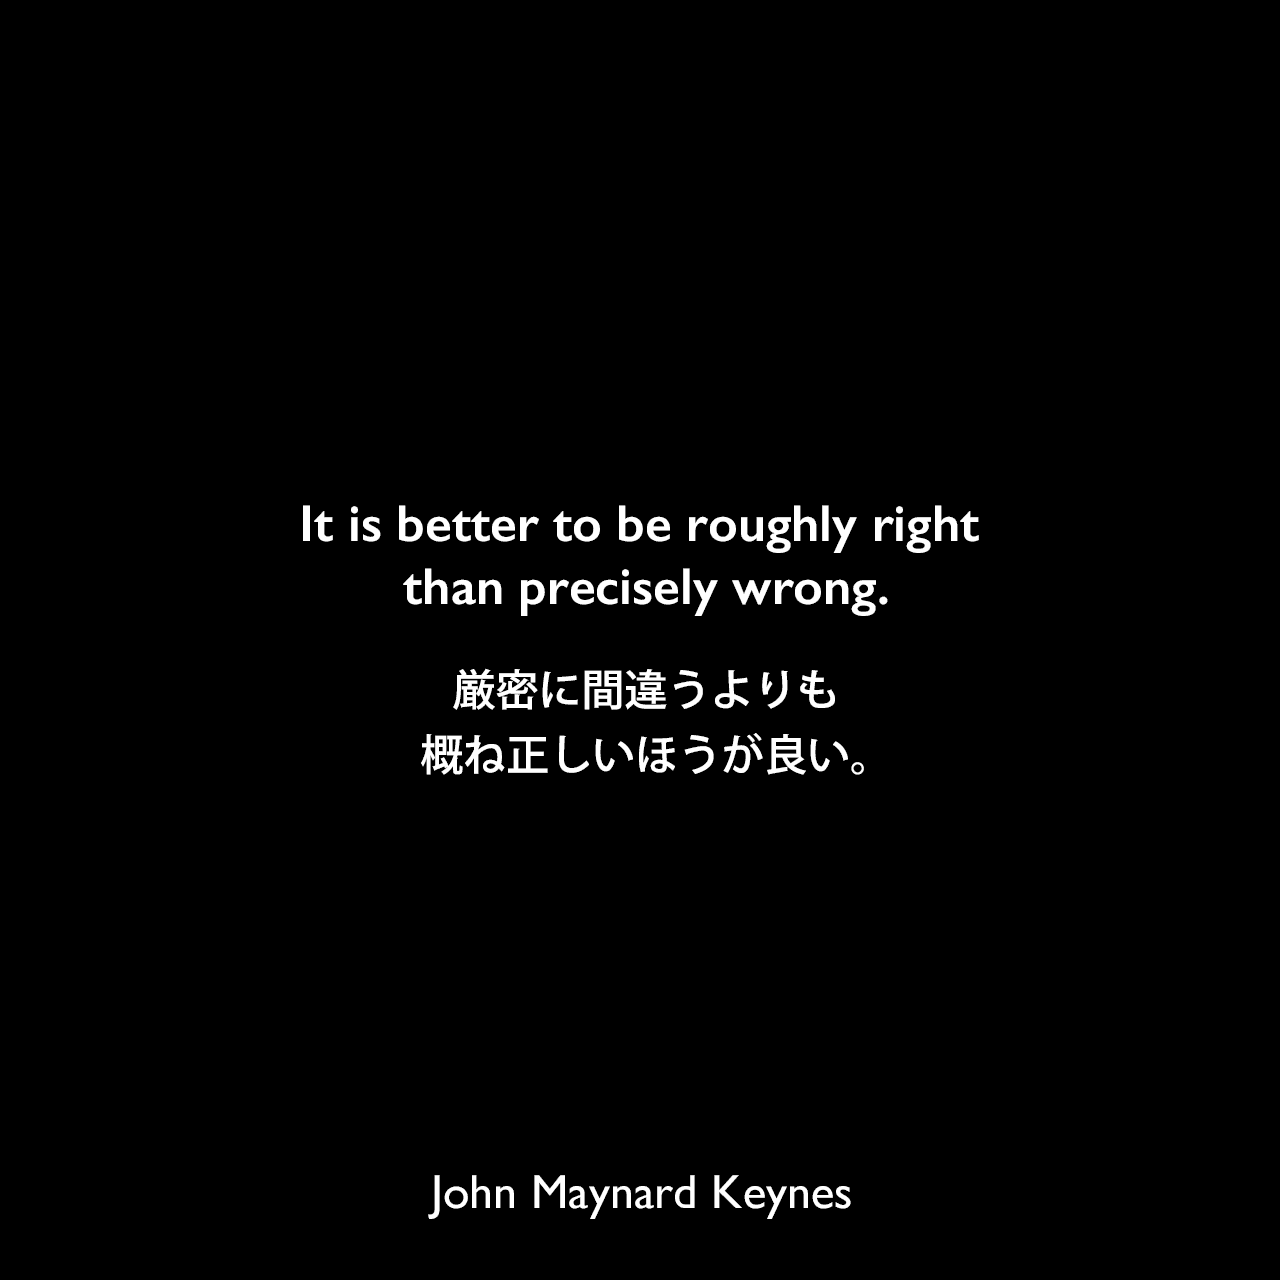 It is better to be roughly right than precisely wrong.厳密に間違うよりも、概ね正しいほうが良い。John Maynard Keynes